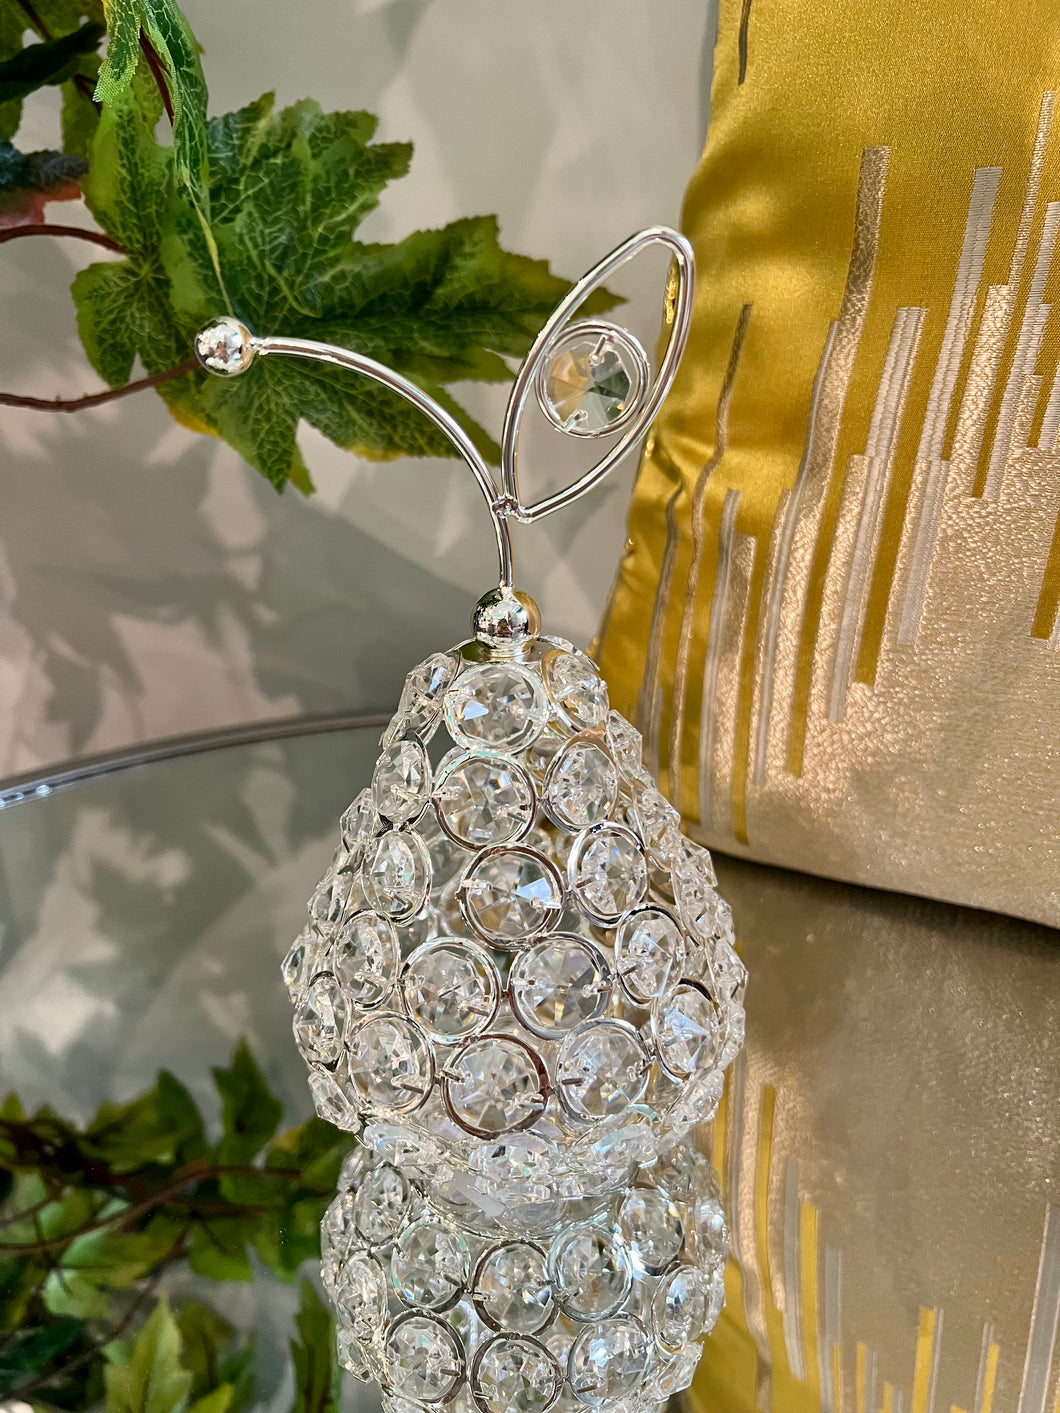 Crystal Nickel Centre Piece in Gold/Silver Metal of a Gorgeous Pear